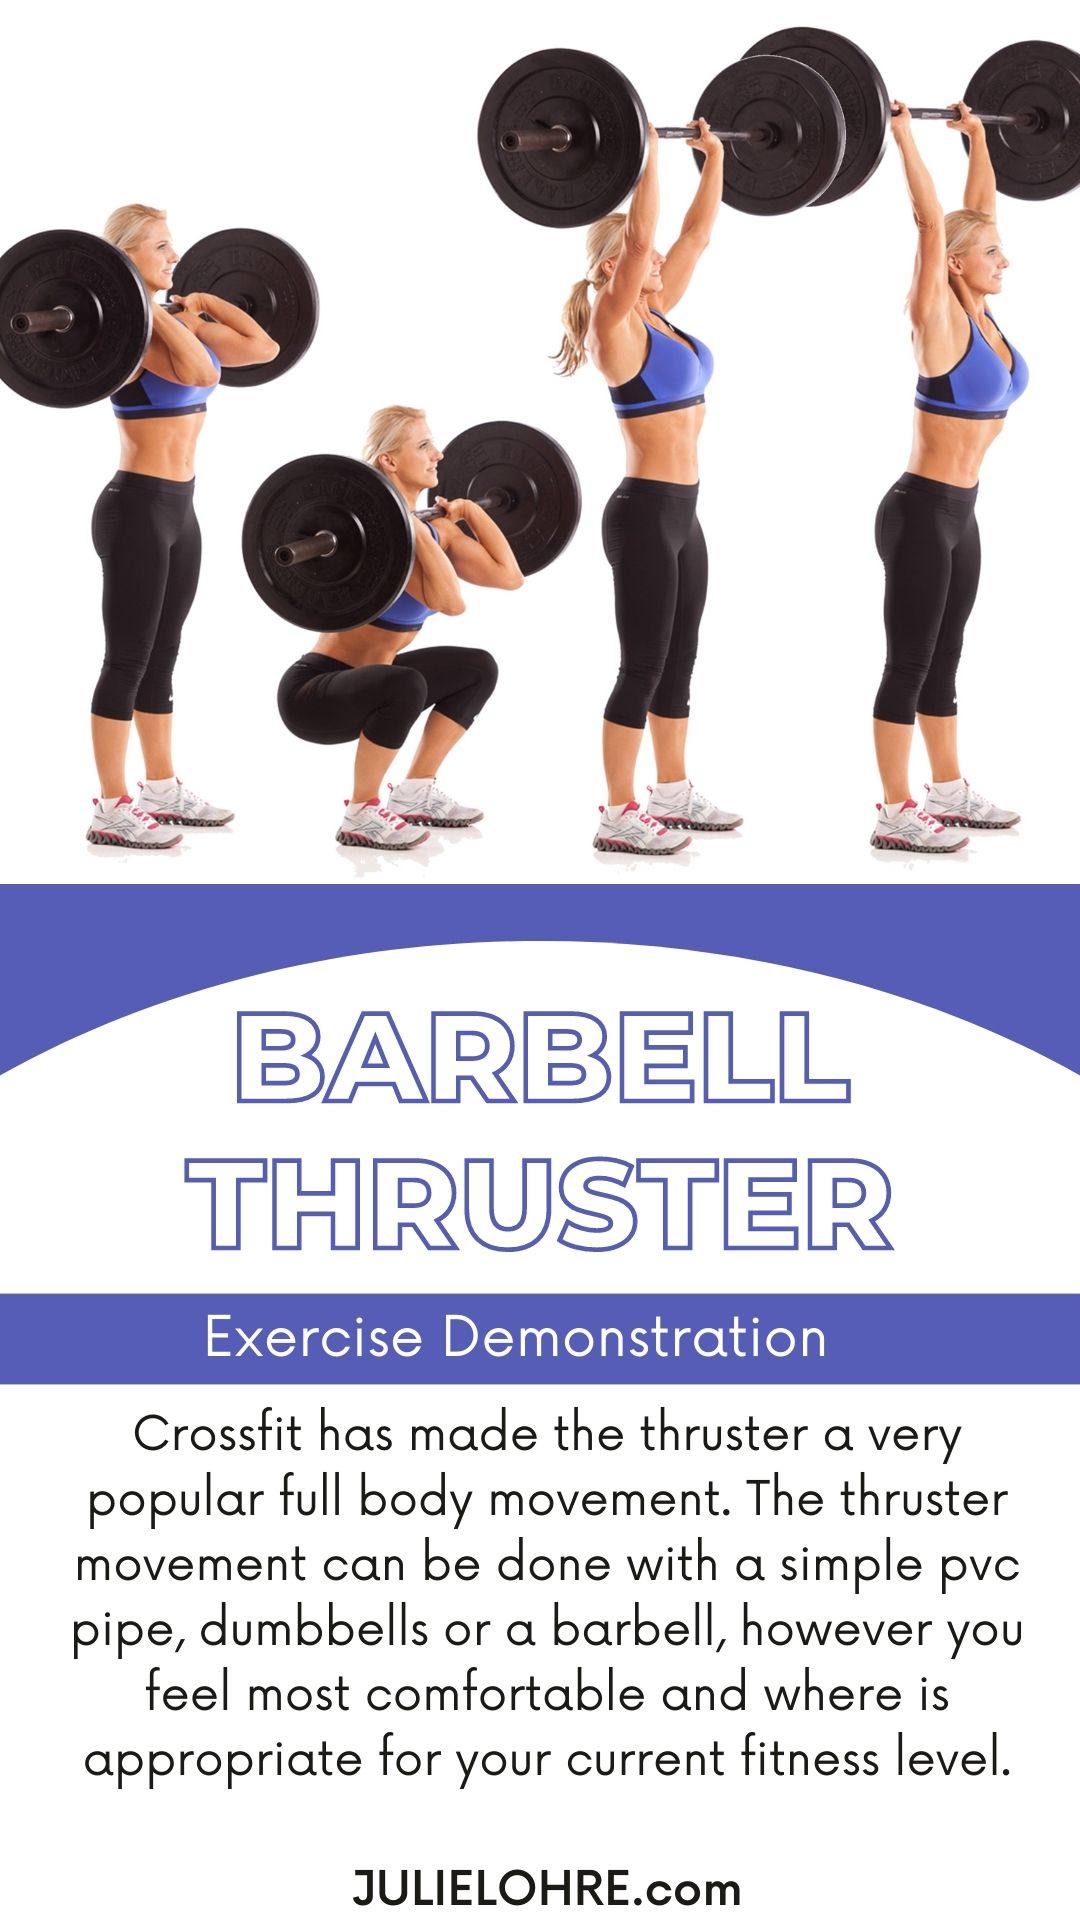 Barbell Thruster Exercise